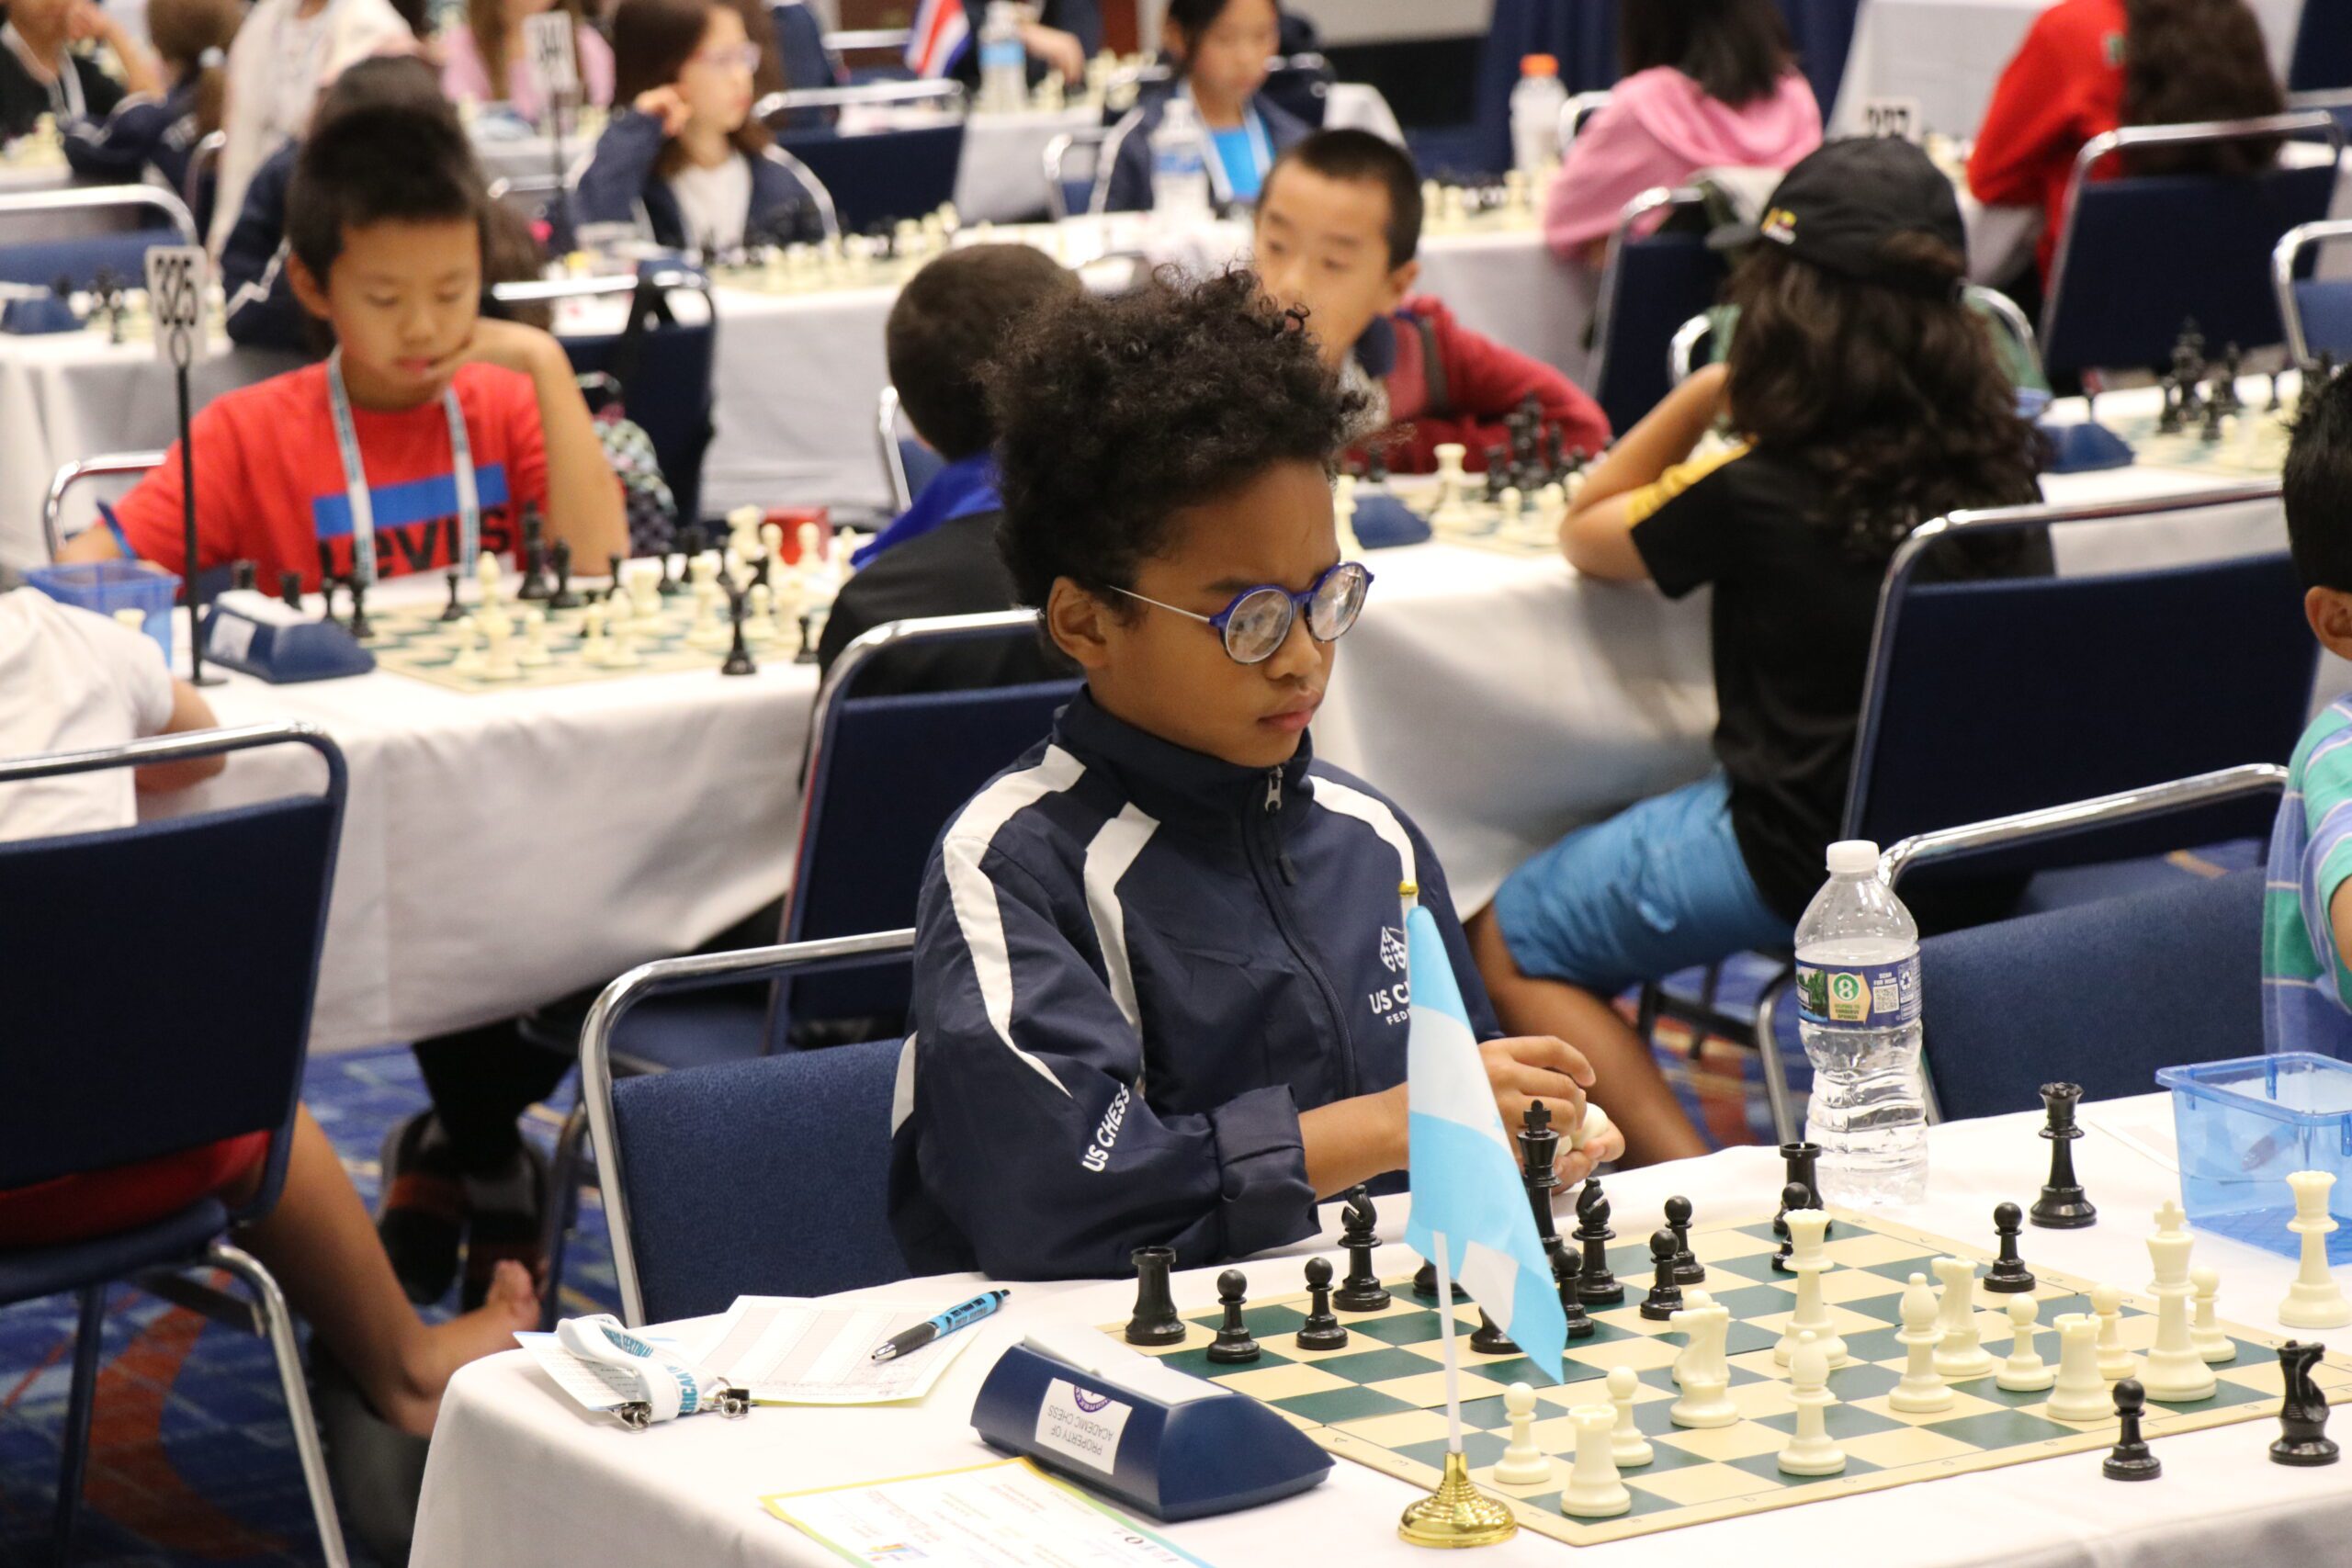 Welcome to the XXXIII Pan-American Youth Chess Festival 2023 - Pan